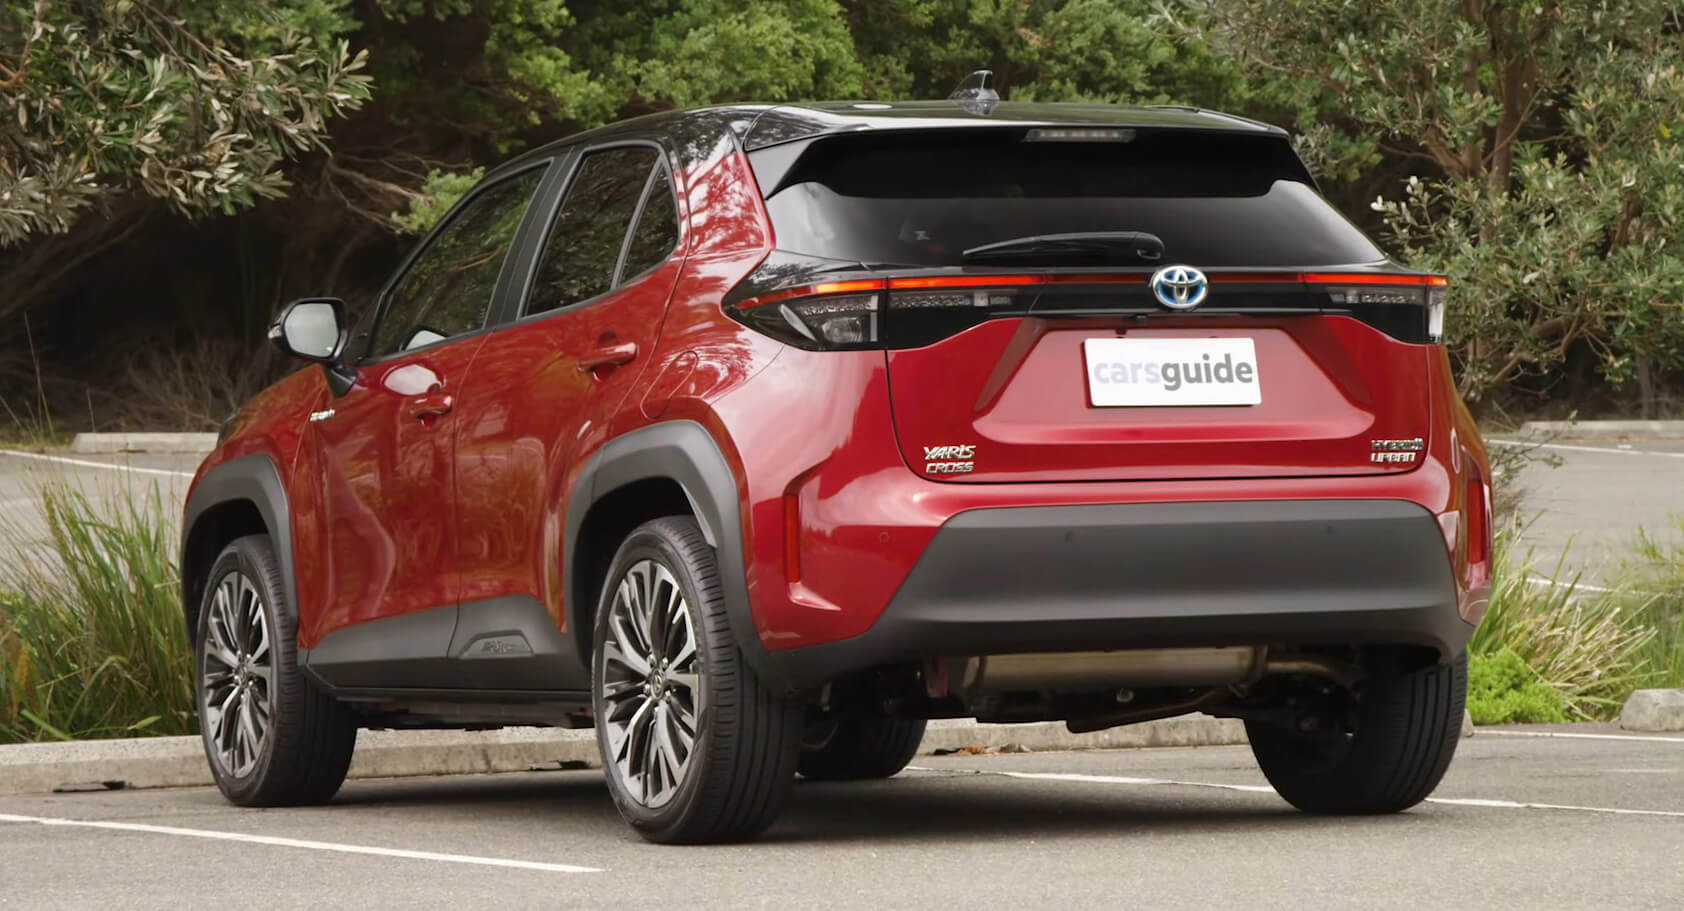 Toyota's Latest SUV Is the Tiny and Adorable Yaris Cross